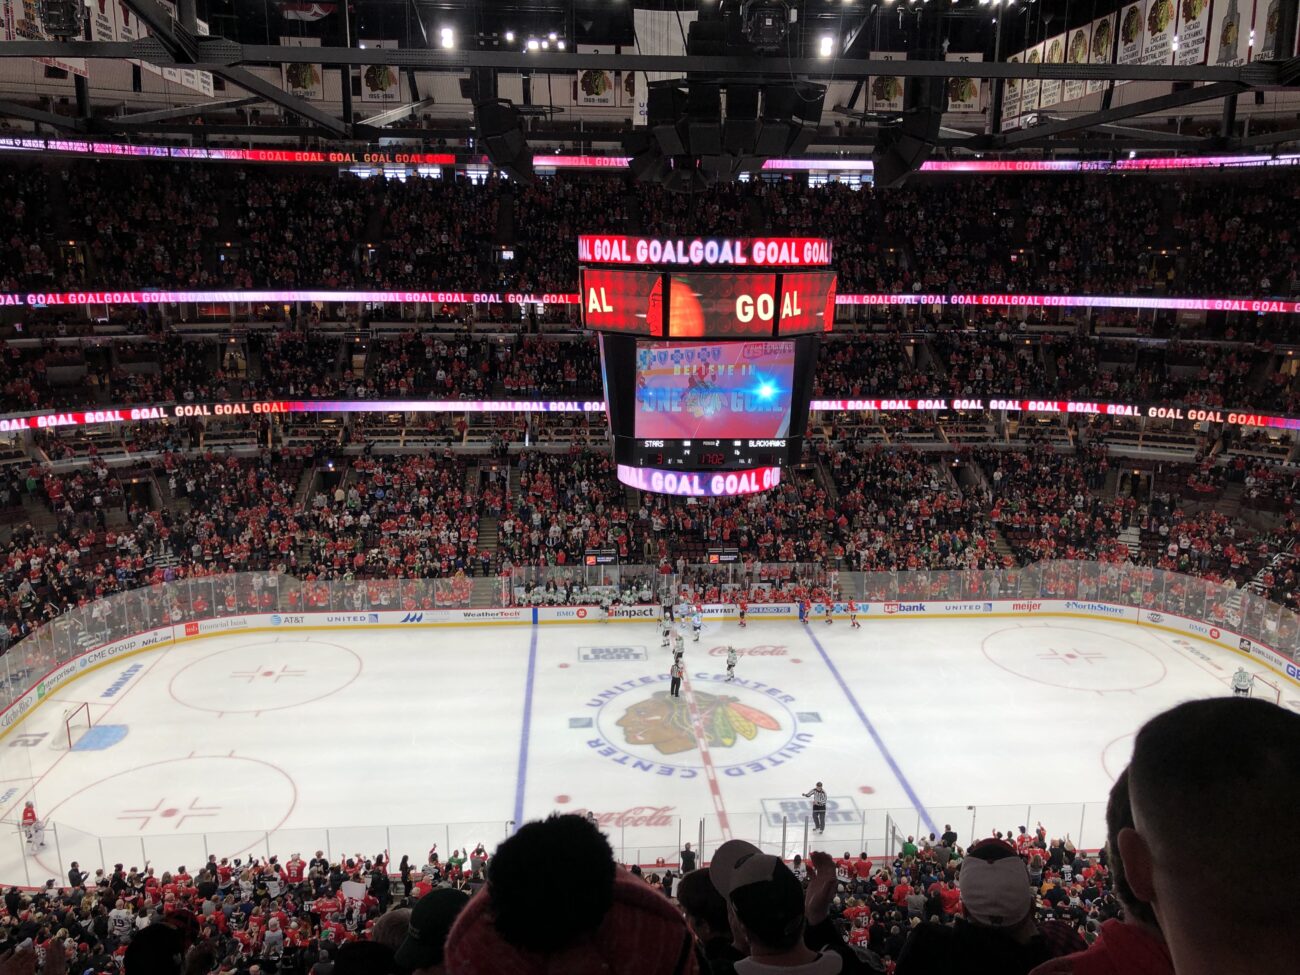 United Center - Here are some details on how to be Happier Than